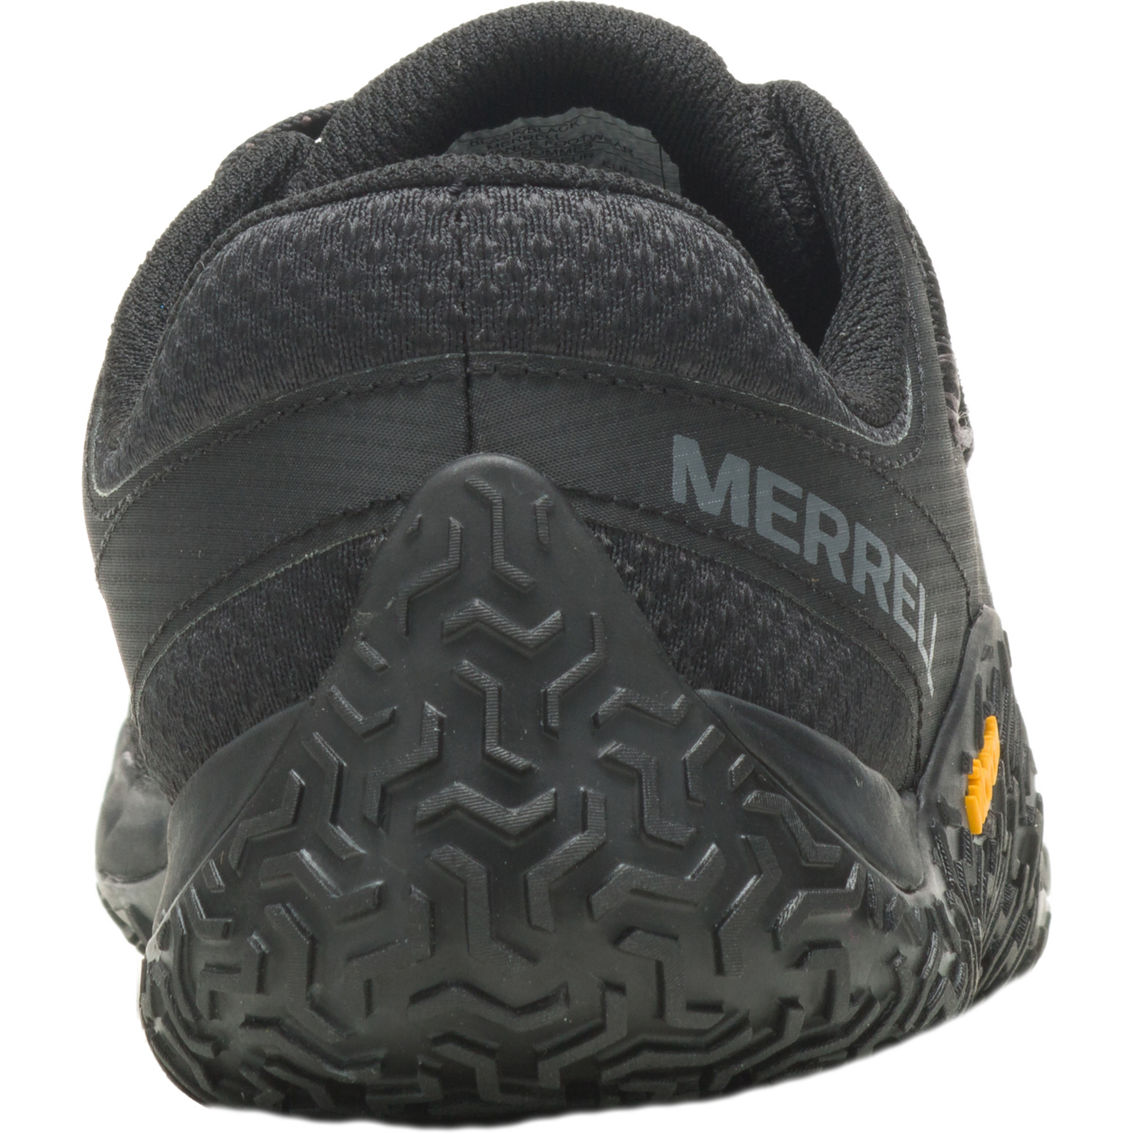 Merrell Men's Trail Glove 7 Shoes - Image 4 of 6